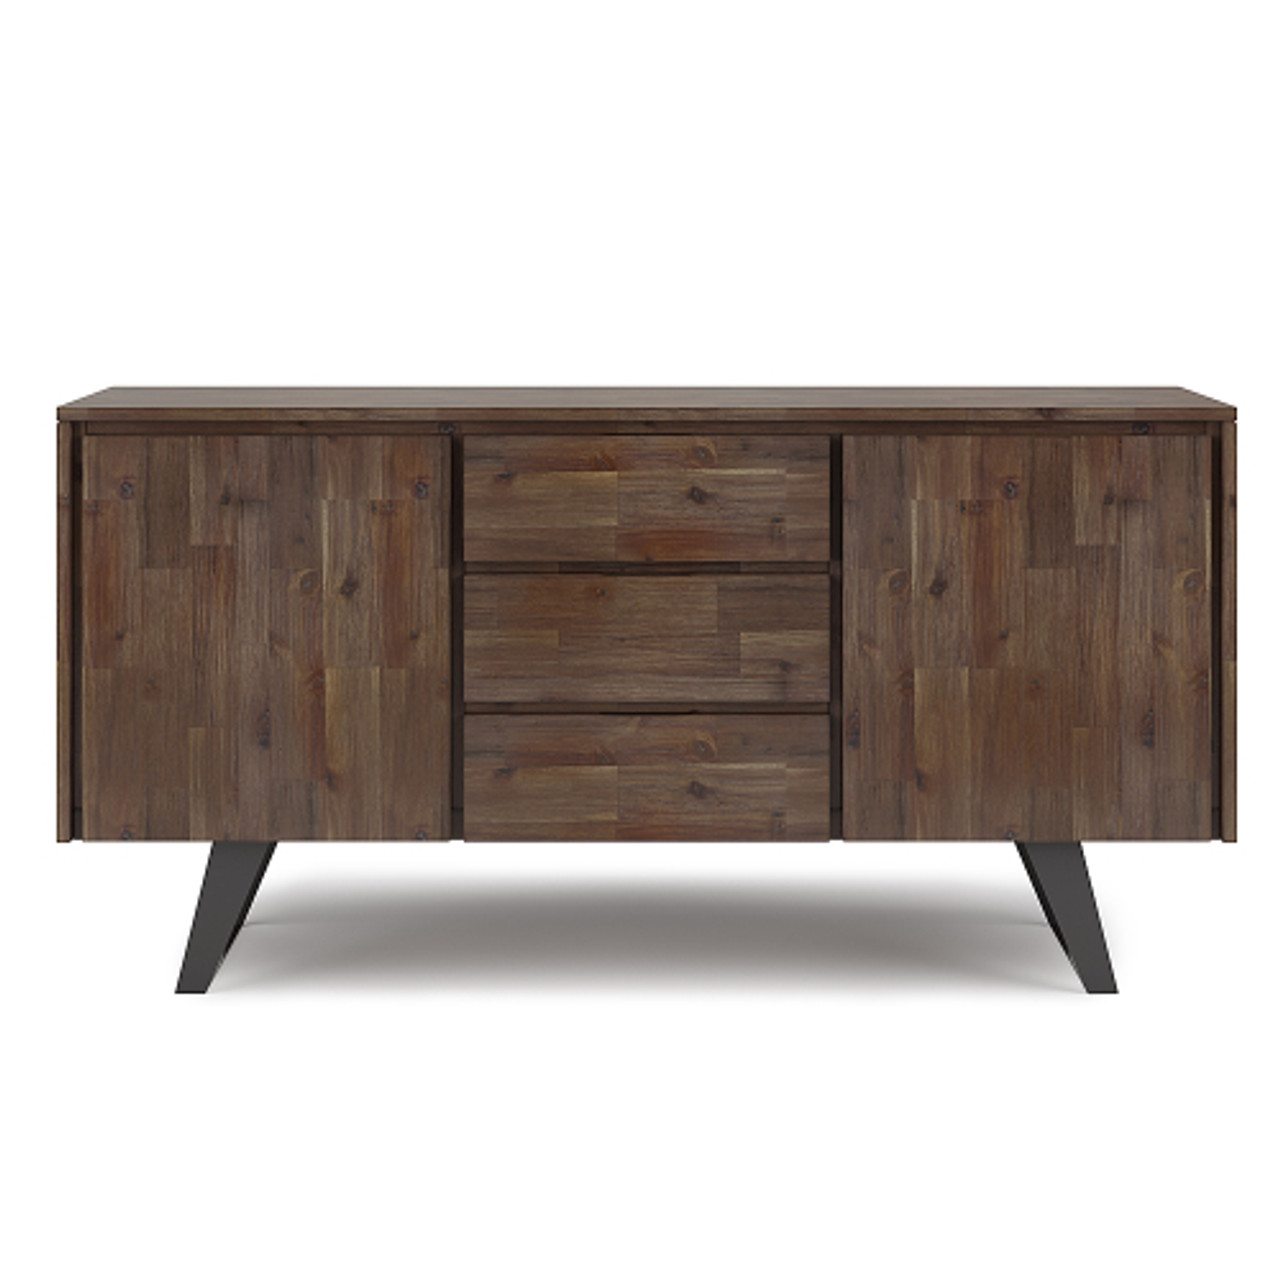 Simpli Home - Lowry Solid Acacia Wood and Metal 60 inch WideRectangle Modern Industrial Sideboard Buffet - Rustic Natural Aged Brown